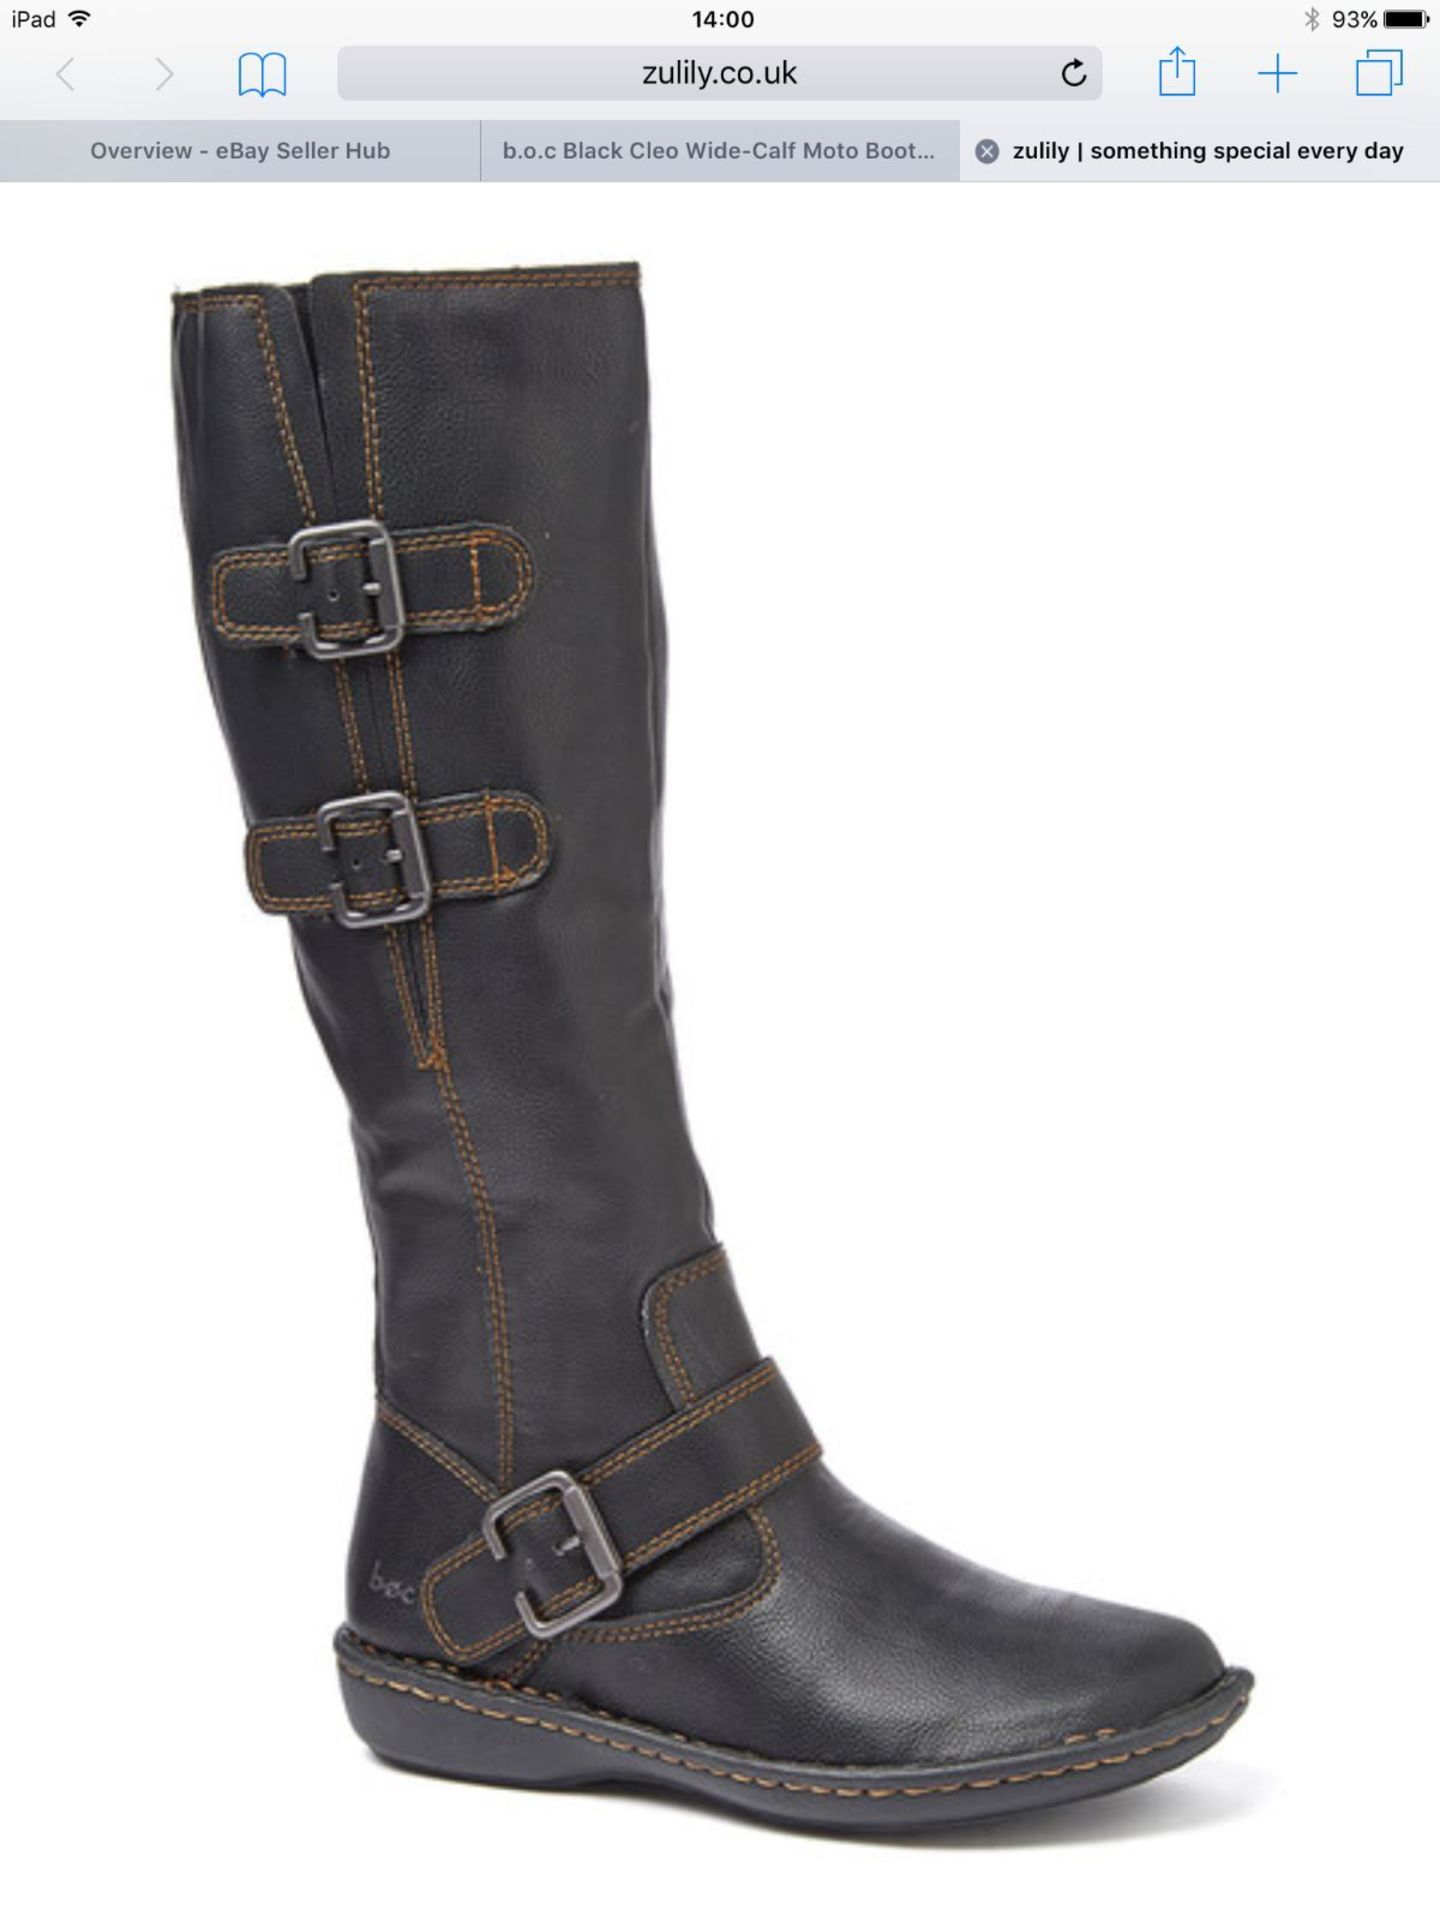 b.o.c. Black Cleo Wide-Calf Moto Boot, Size Eur 38, RRP £130.99 (New with box)